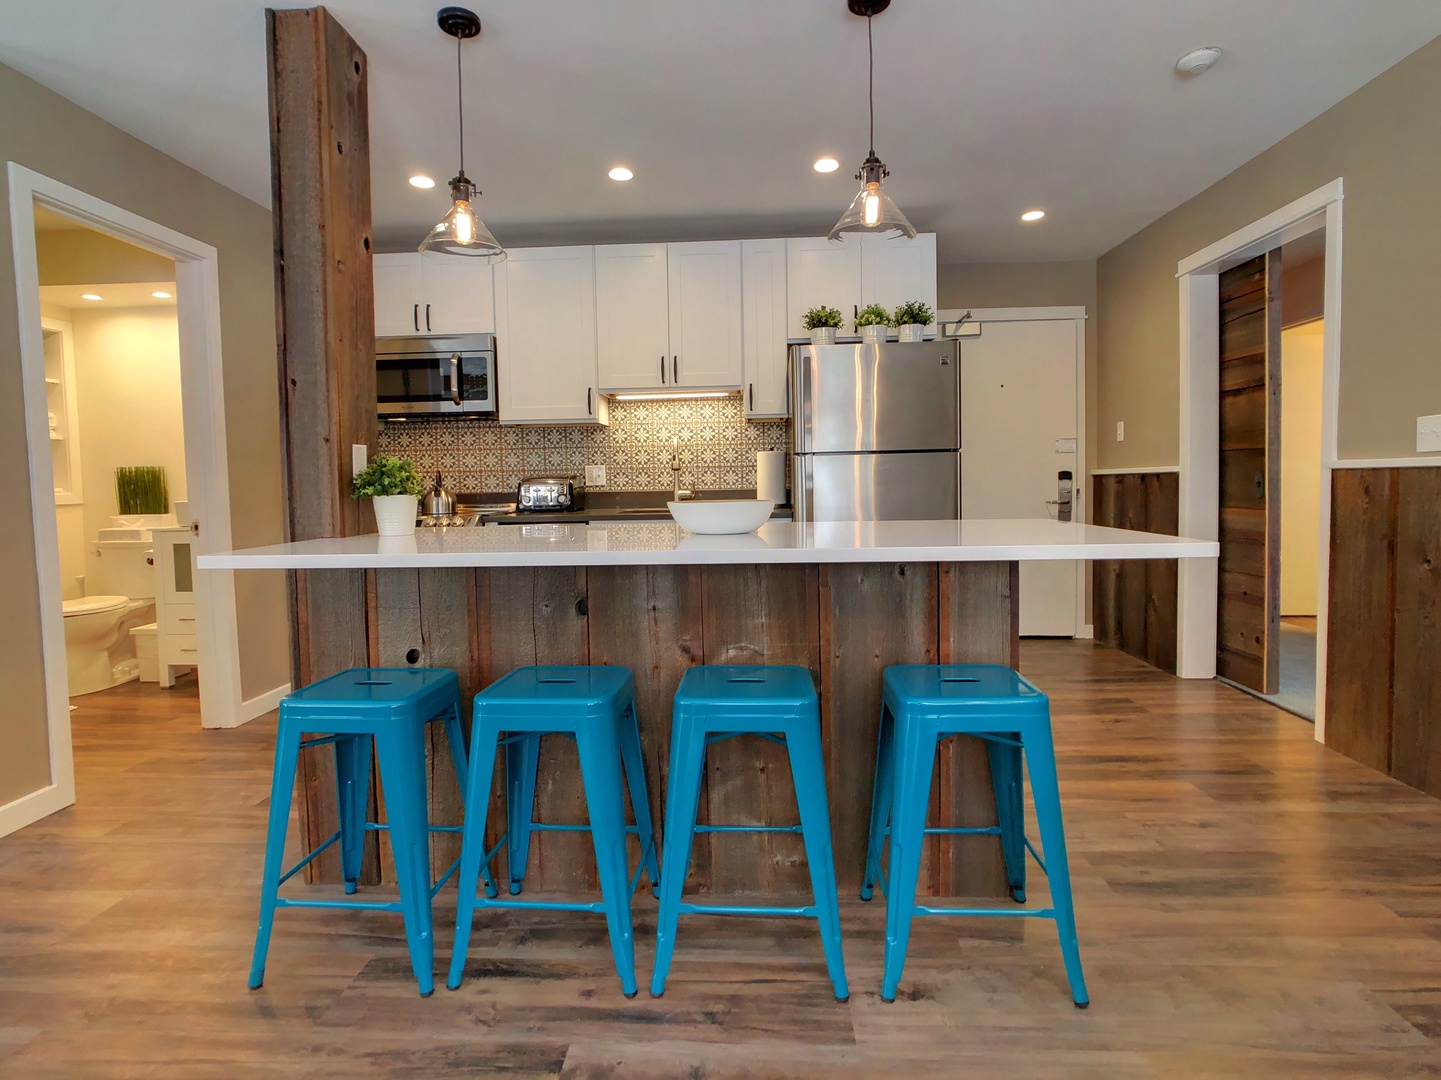 Kitchen island with seating for four